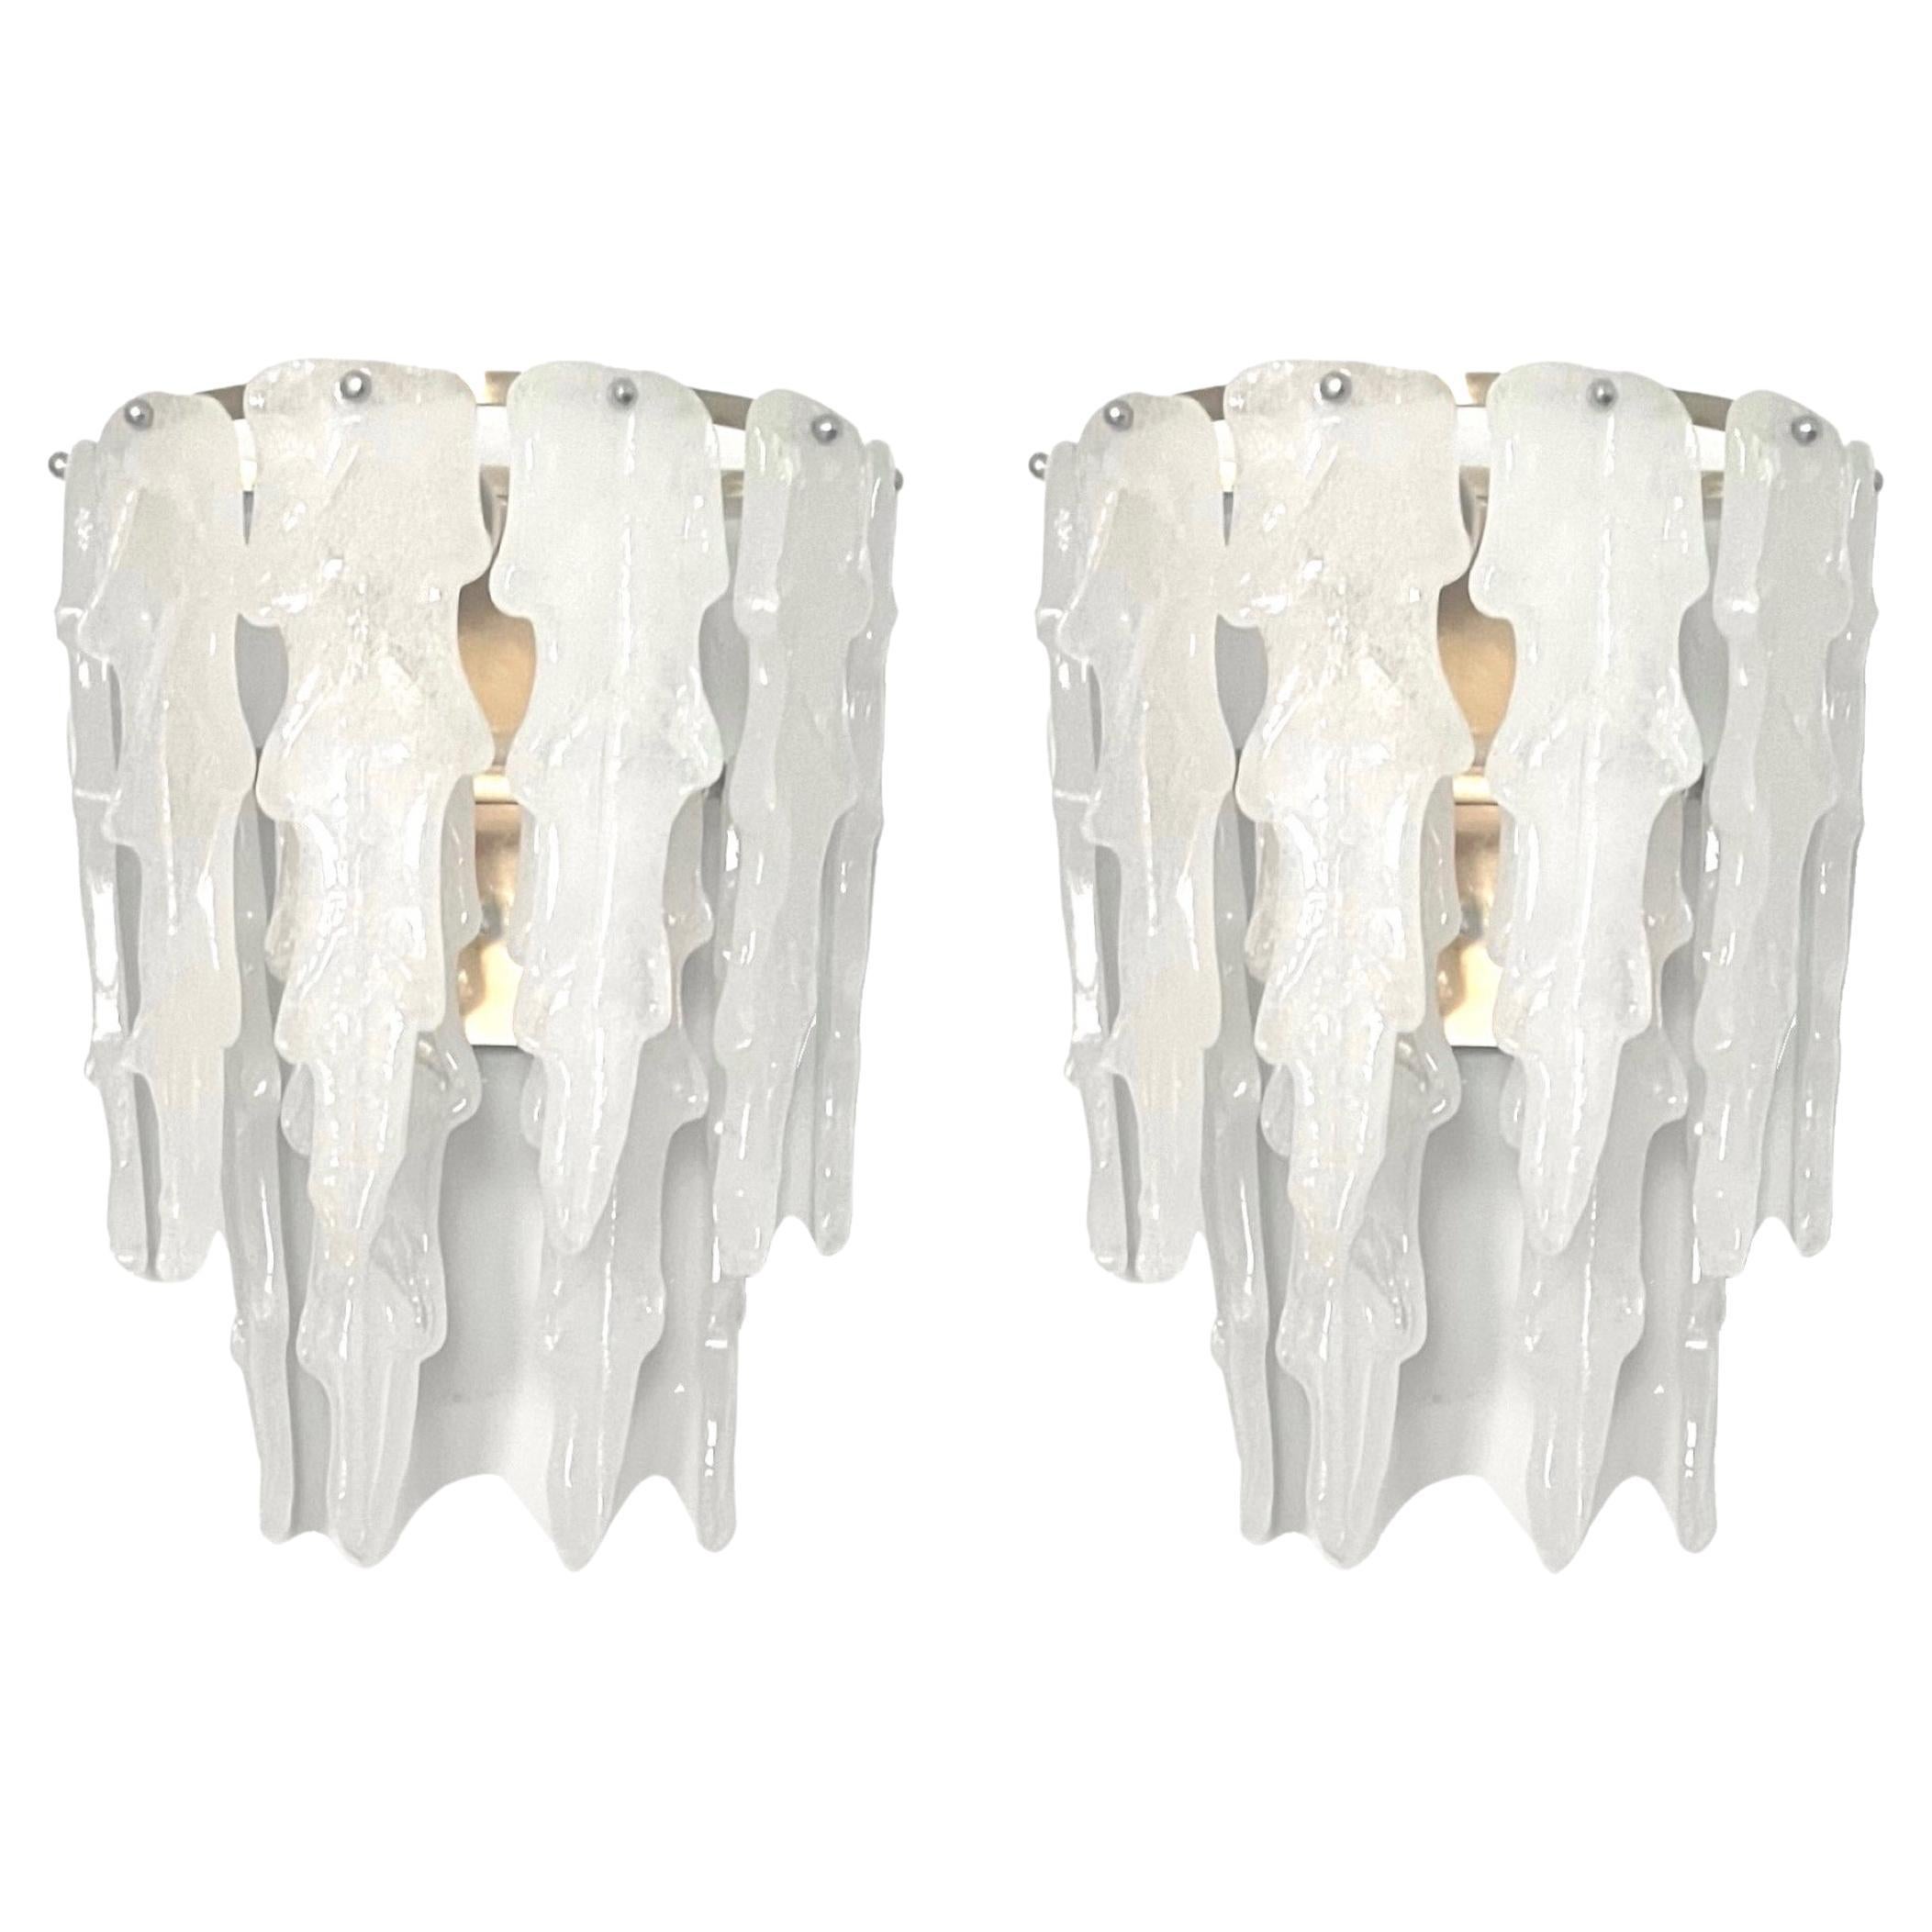 Midcentury Pair of Italian White Murano Leaf Wall Sconces by Mazzega, 1970s